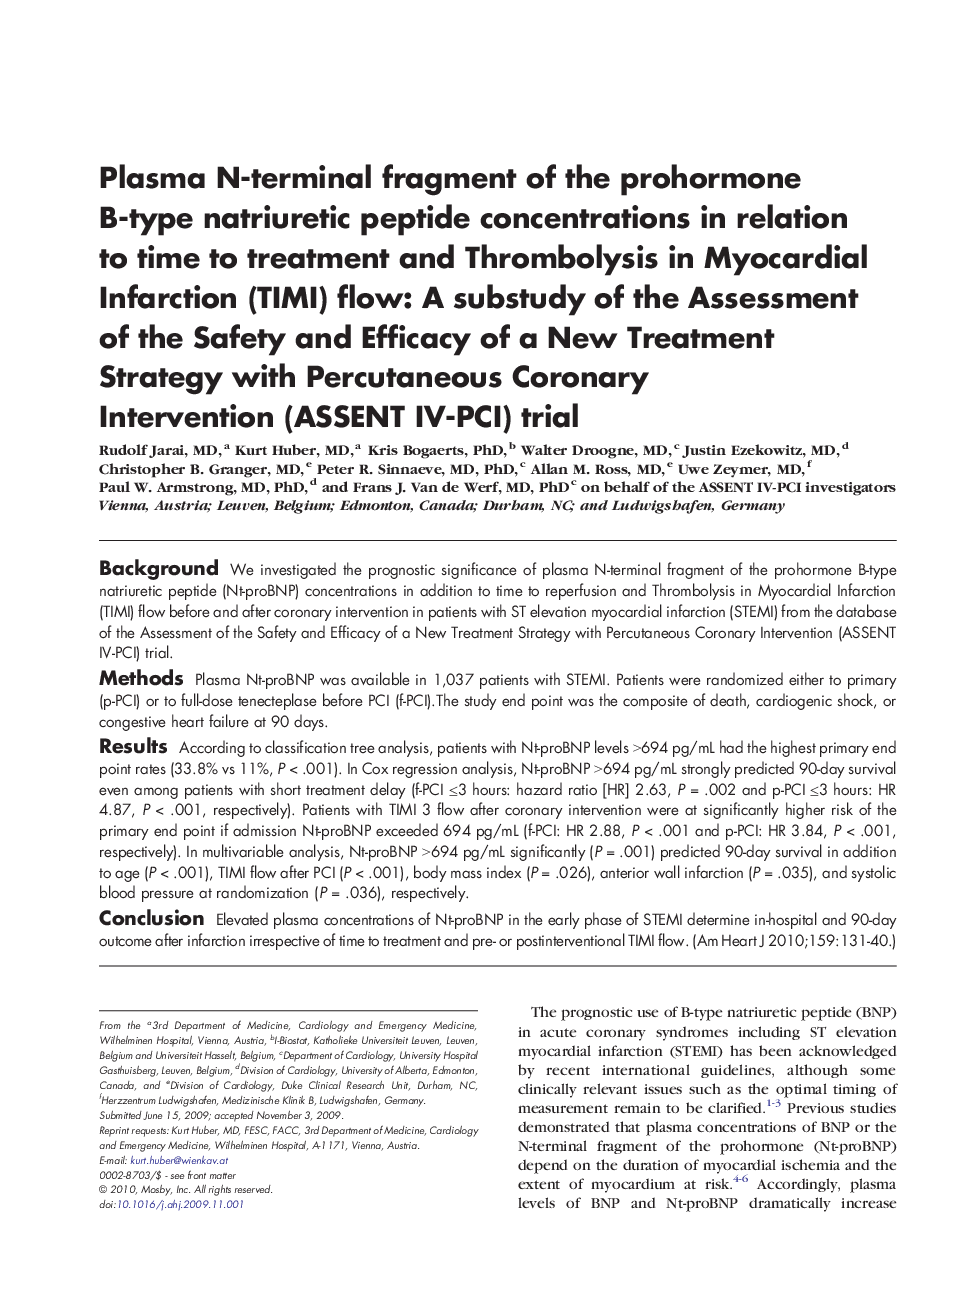 Plasma N-terminal fragment of the prohormone B-type natriuretic peptide concentrations in relation to time to treatment and Thrombolysis in Myocardial Infarction (TIMI) flow: A substudy of the Assessment of the Safety and Efficacy of a New Treatment Strat